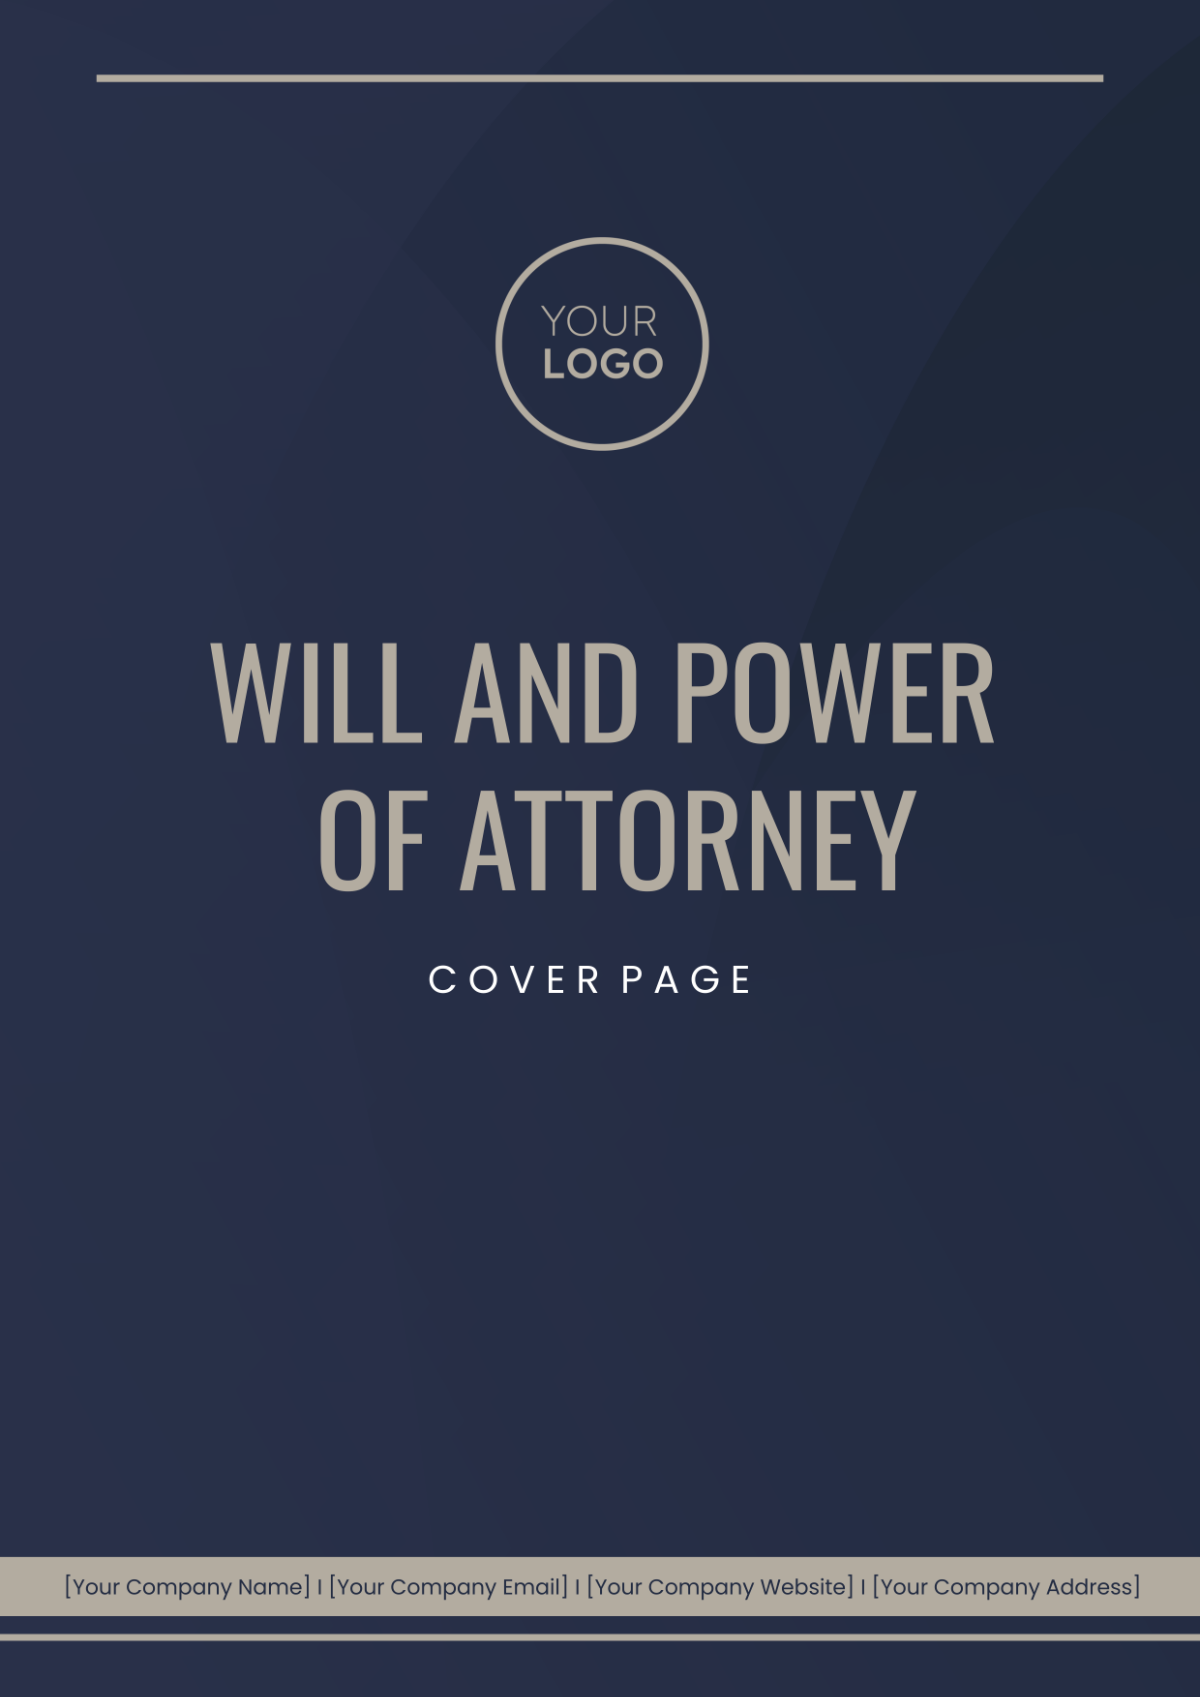 Will And Power of Attorney Cover Page